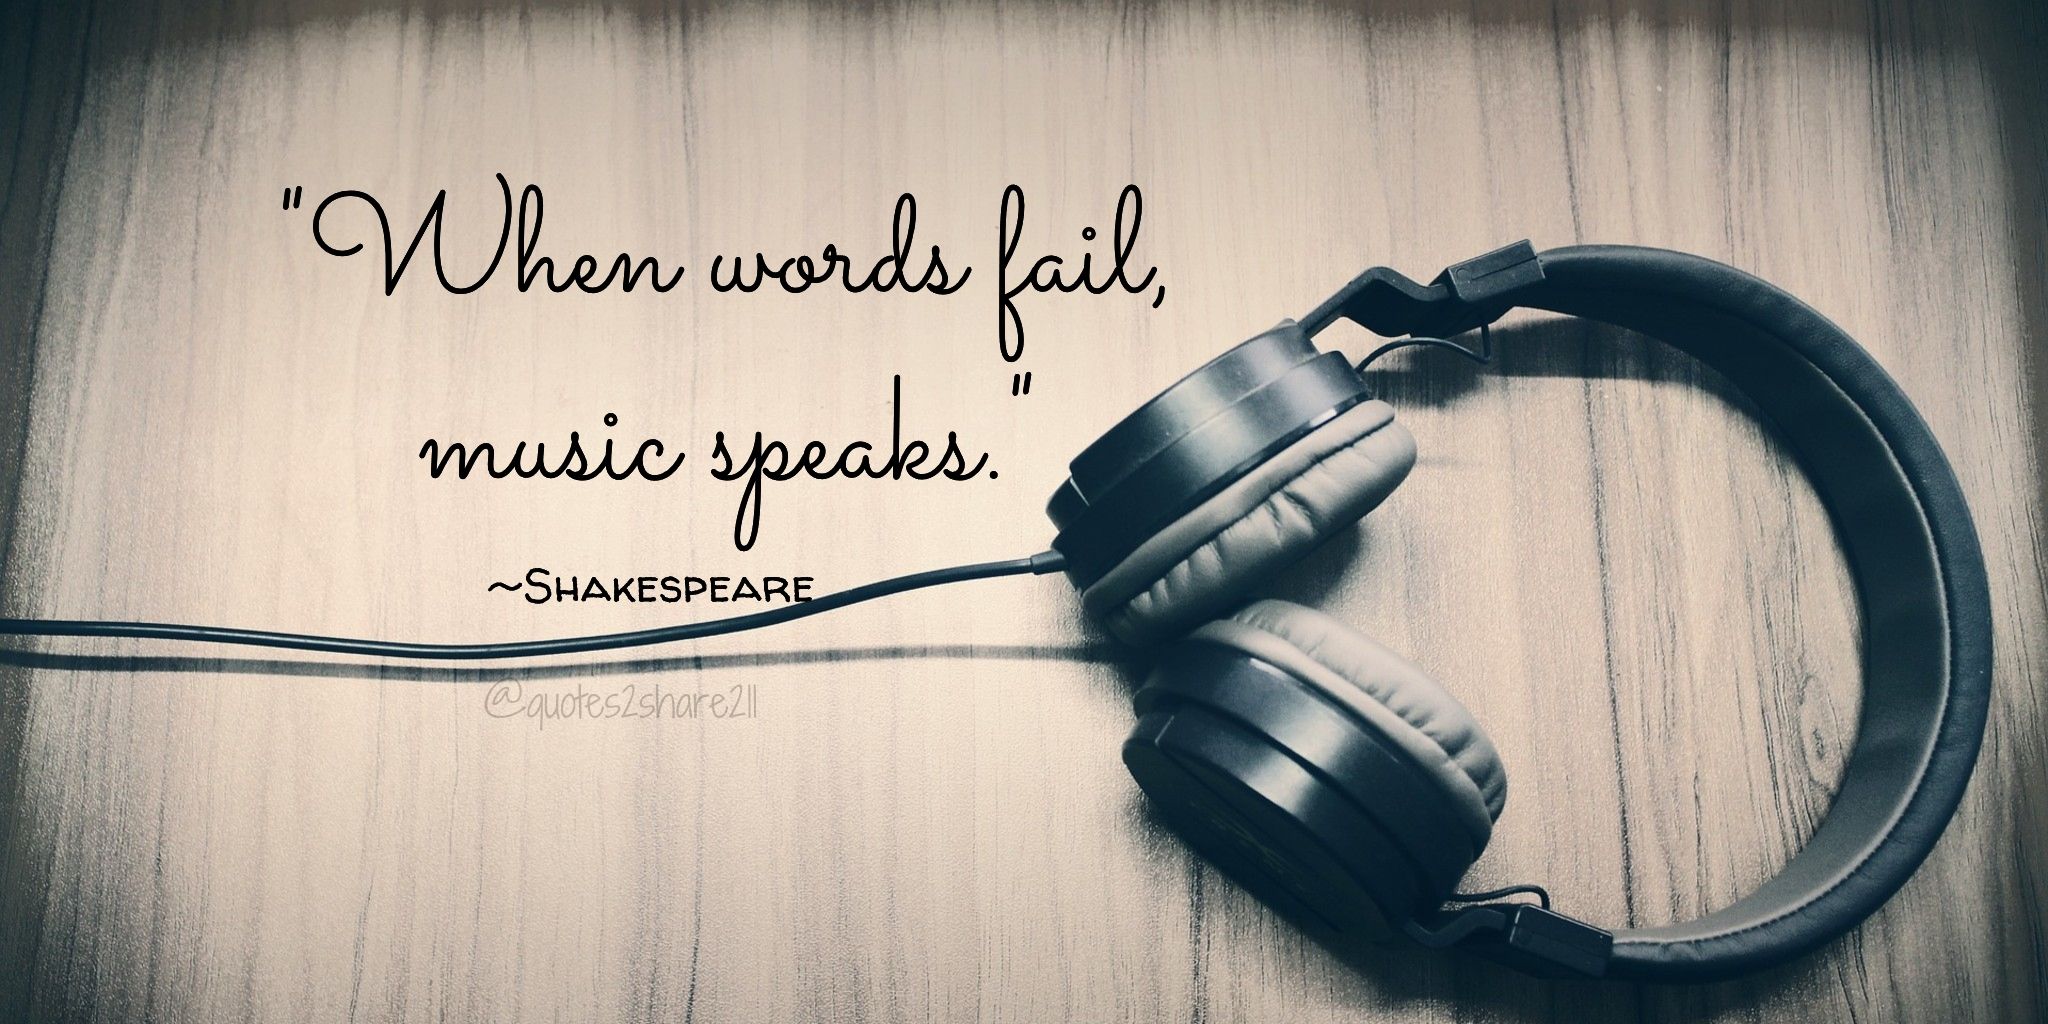 Good Life Quotes on Twitter: ""When words fail, music 